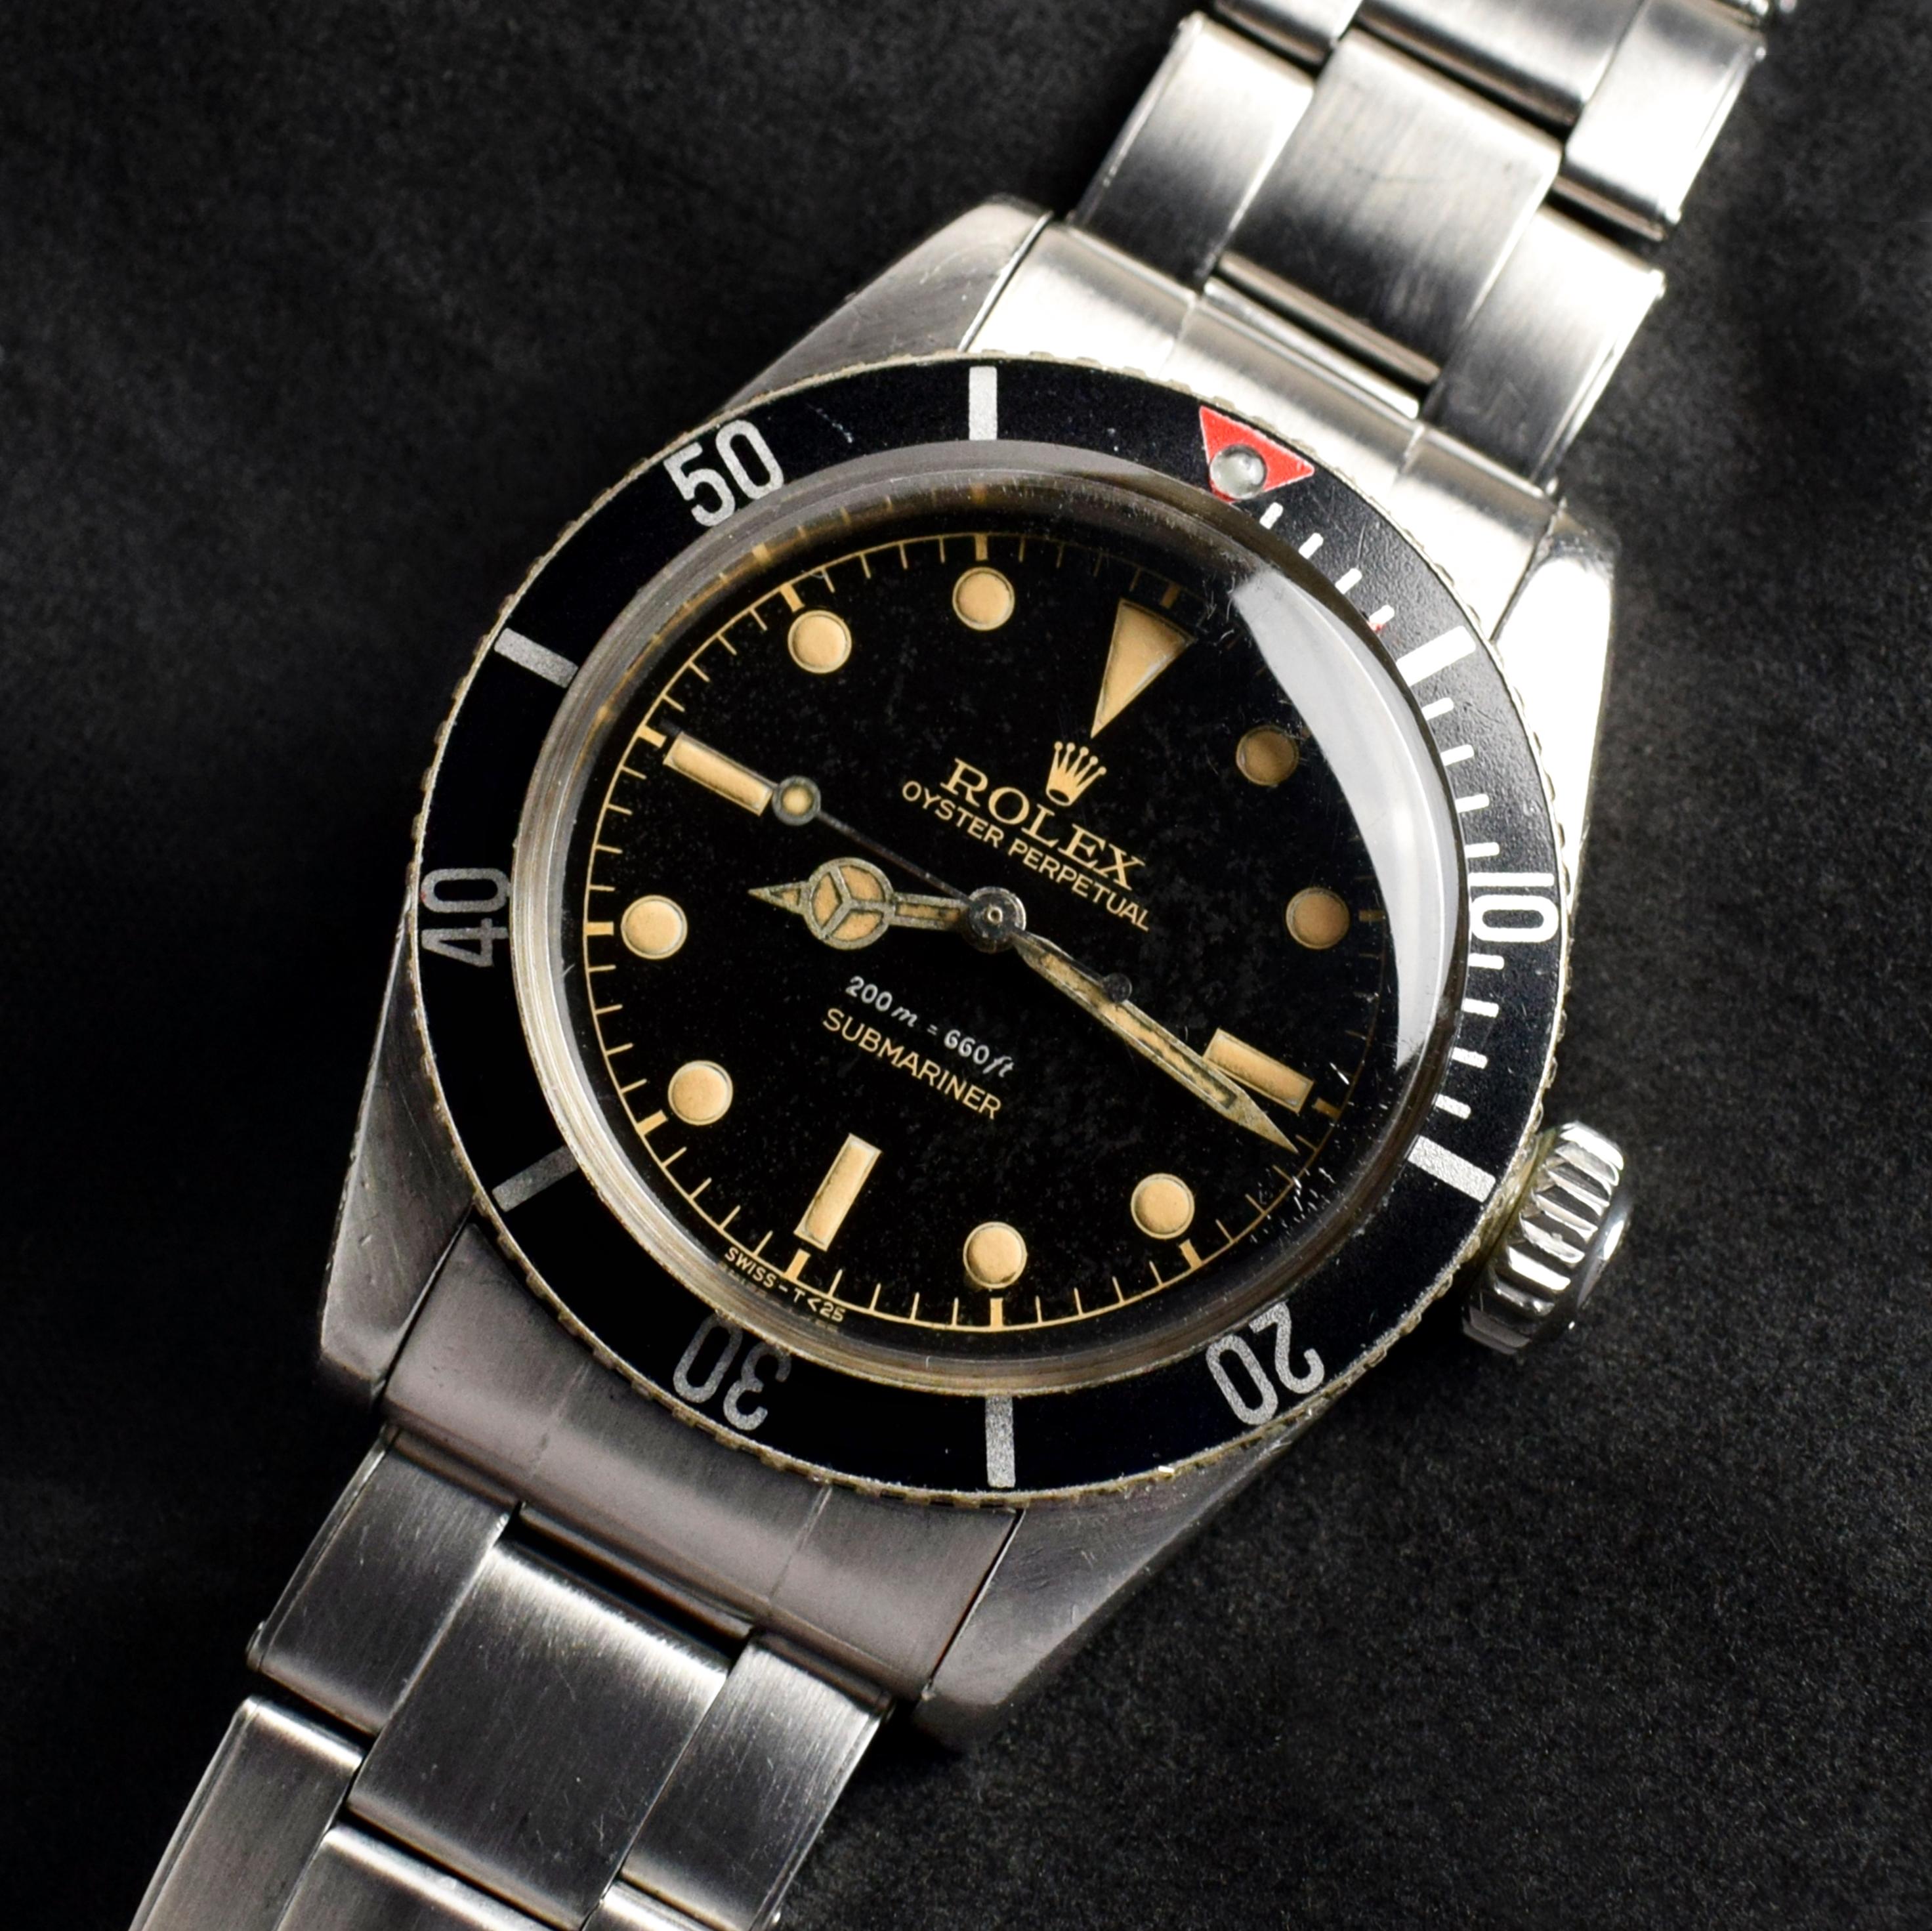 Brand: Vintage Rolex
Model: 6538
Year: 1959
Serial number: 44xxxx
Reference: OT1331

Case: Show sign of wear with minor slight polish from previous w/ 6538 II 59 stamped on inner case back along with the red triangle insert

Dial: Excellent Aged